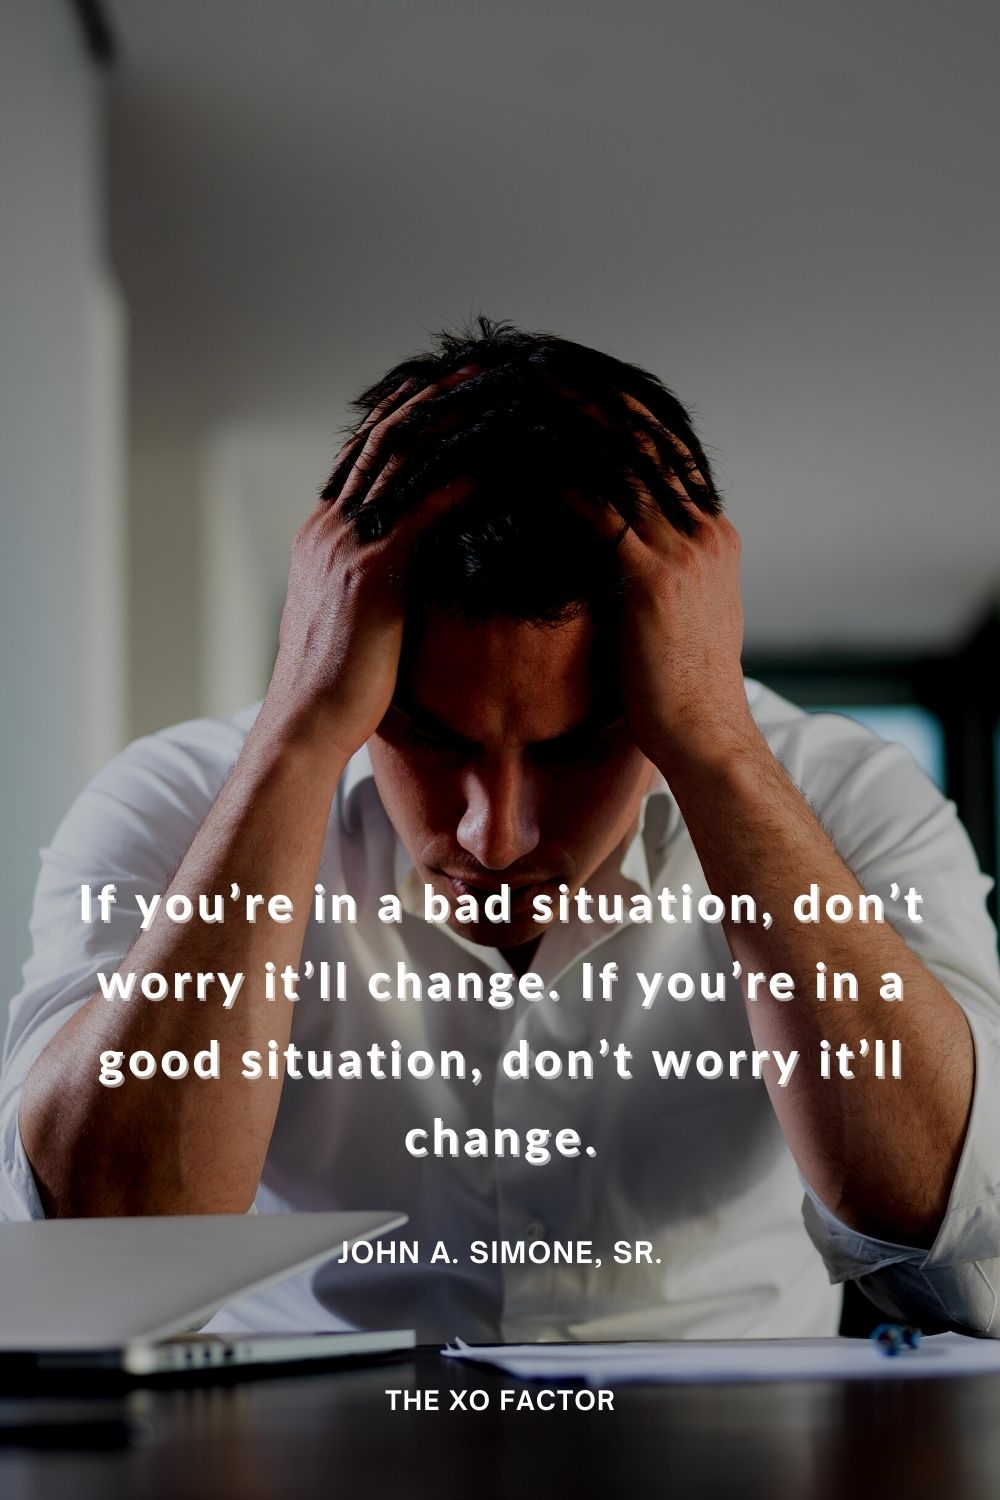 If you’re in a bad situation, don’t worry it’ll change. If you’re in a good situation, don’t worry it’ll change.